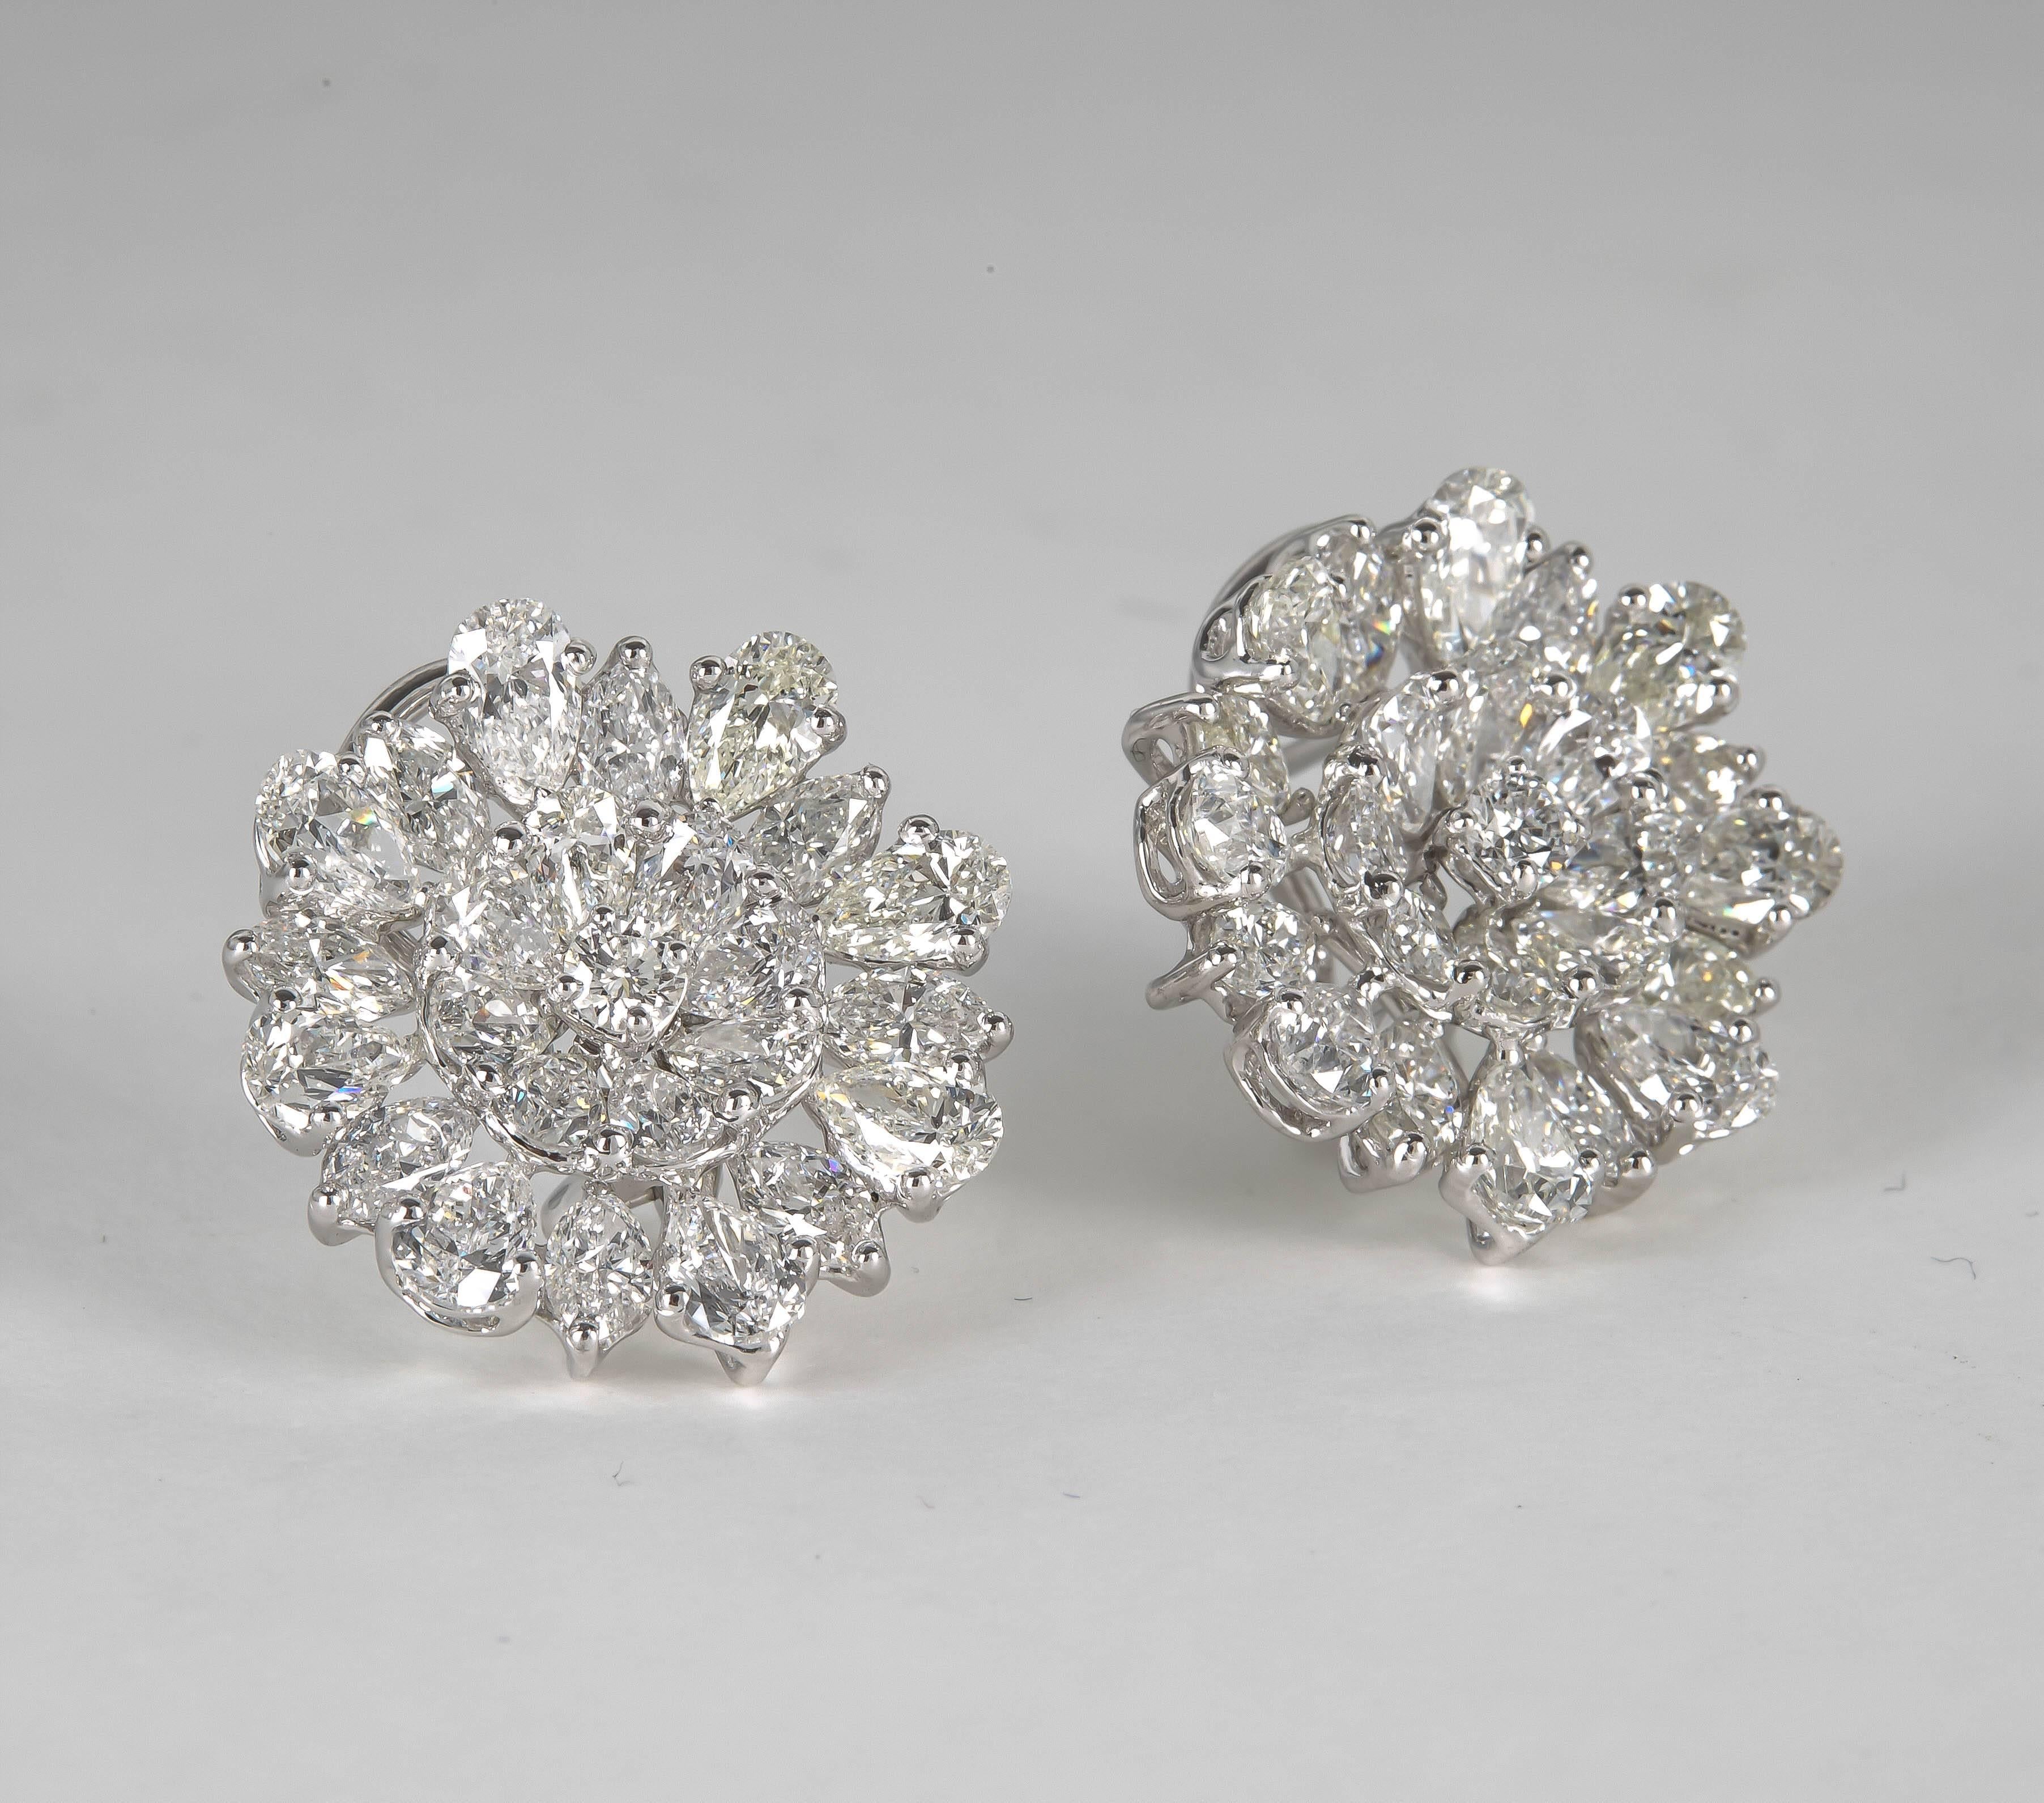 A fabulous earring and a rare find!

14.30 carats of round brilliant, pear and marquise cut diamonds set in platinum. 

A magnificent design -- F/G VS diamonds.

Approximately 3/4 inch in height and width.

Please contact us for more